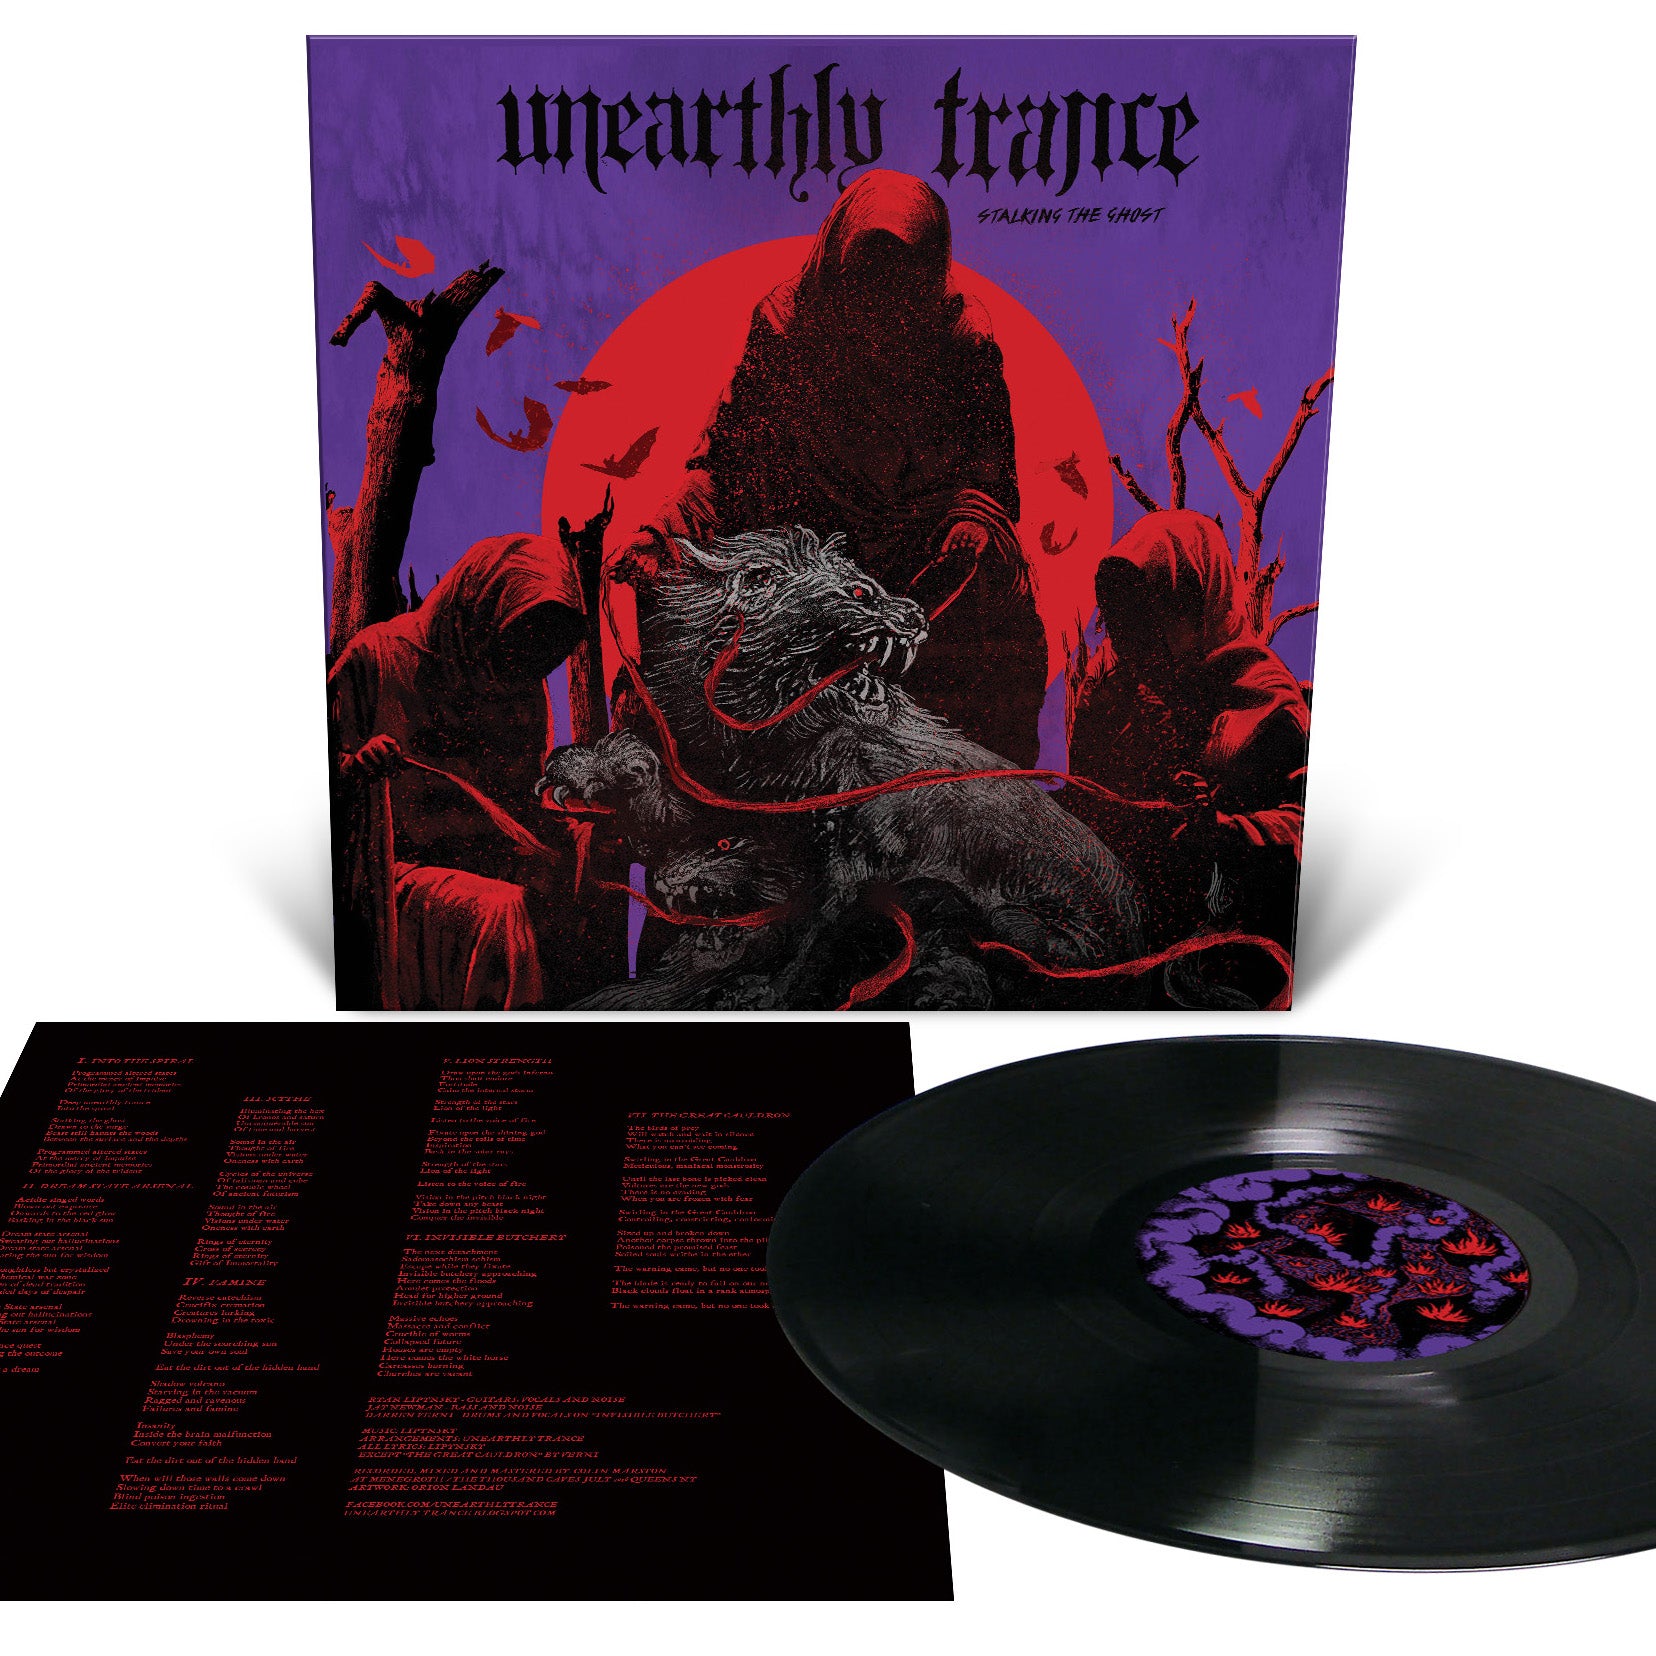 Unearthly Trance "Stalking The Ghost" 12"